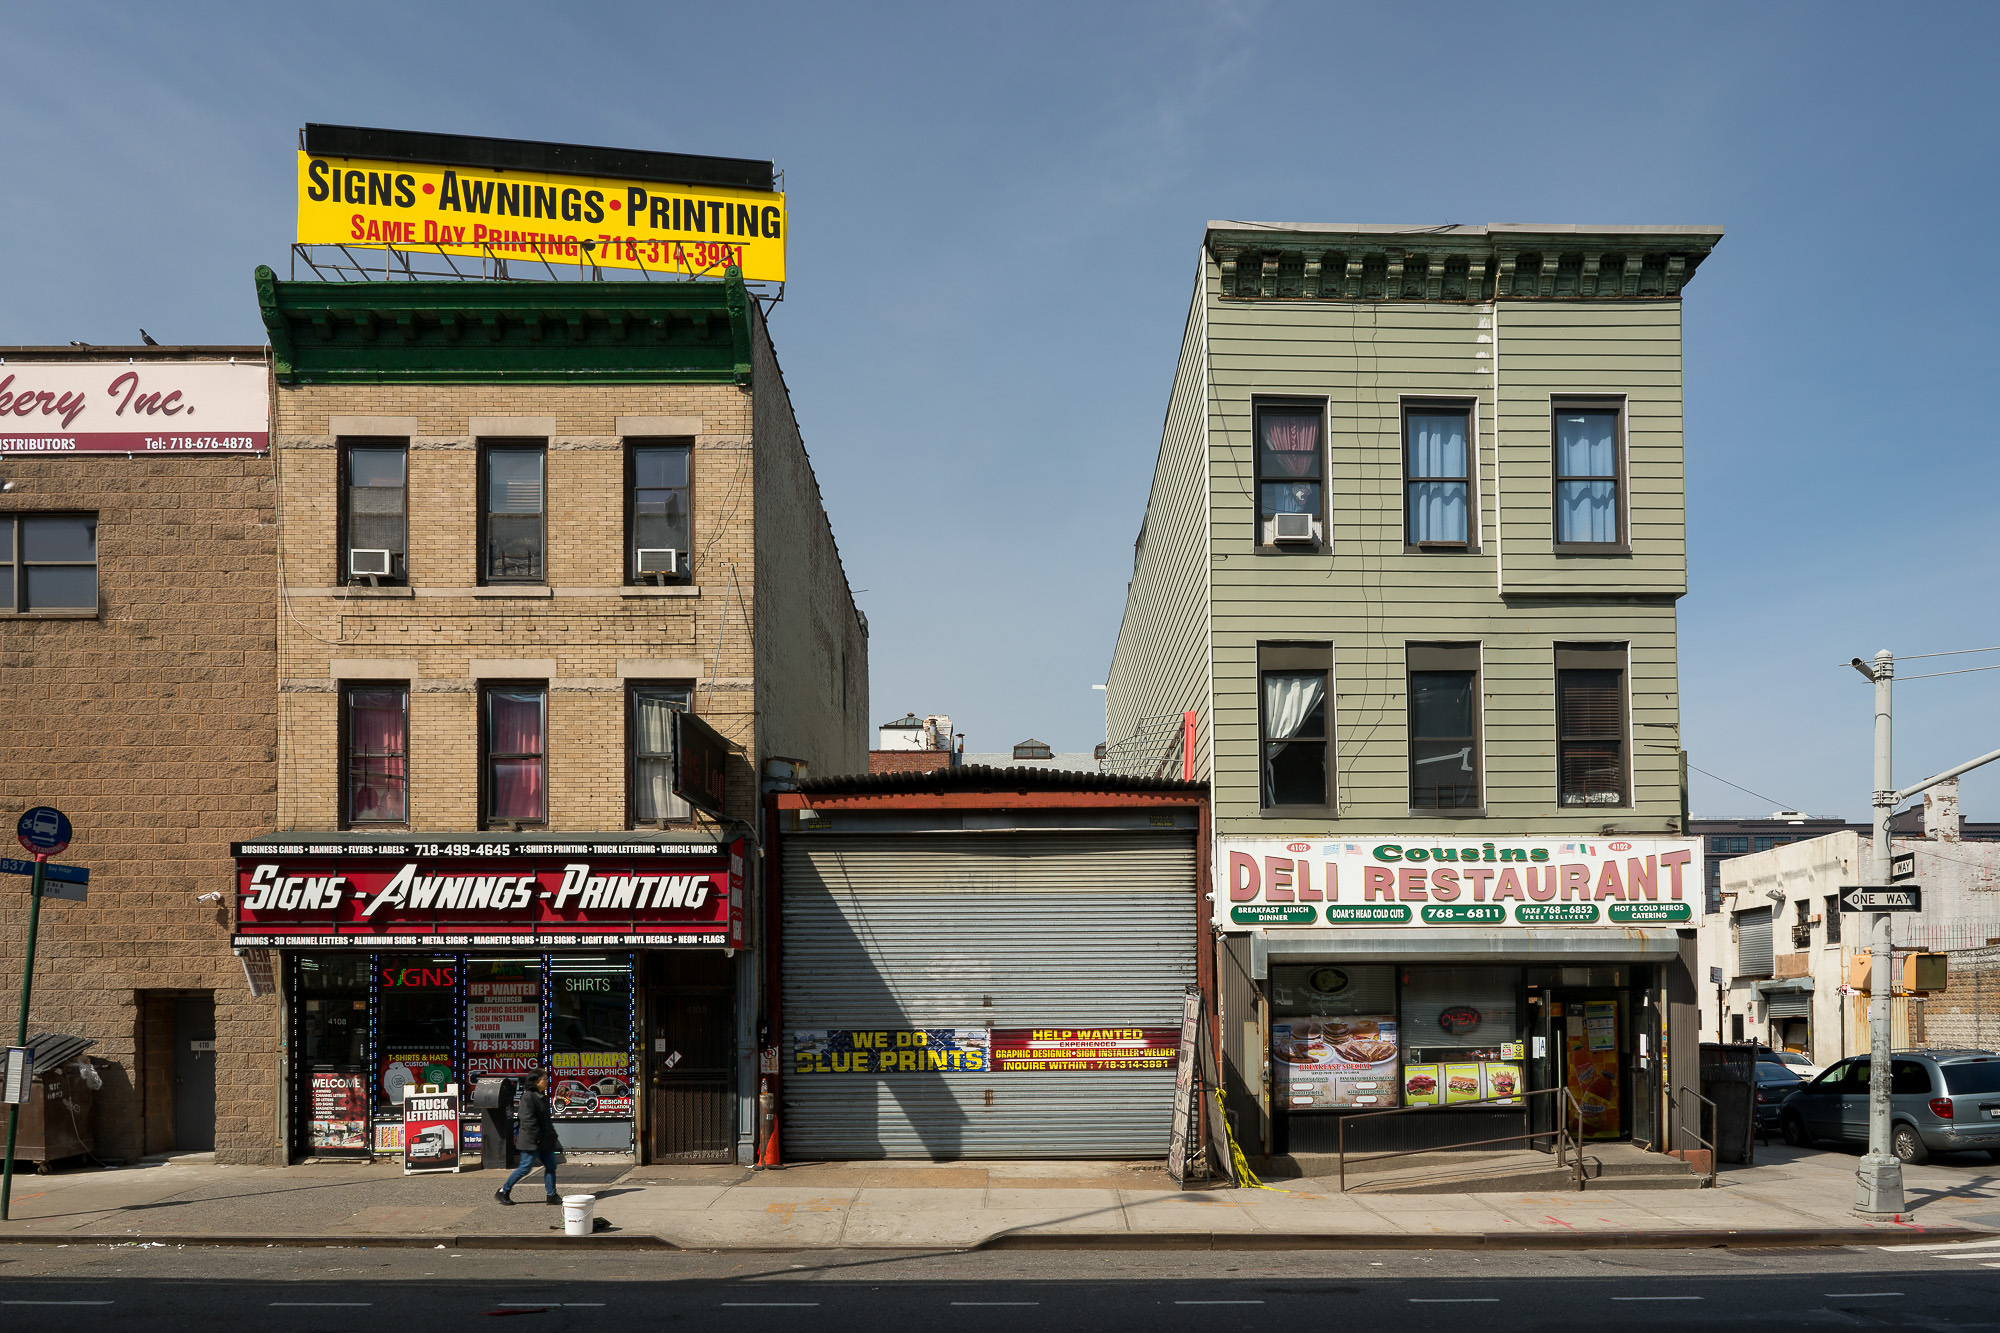 Photograph: 3rd Ave. Corridor, Untitled (deli and signs), 2020